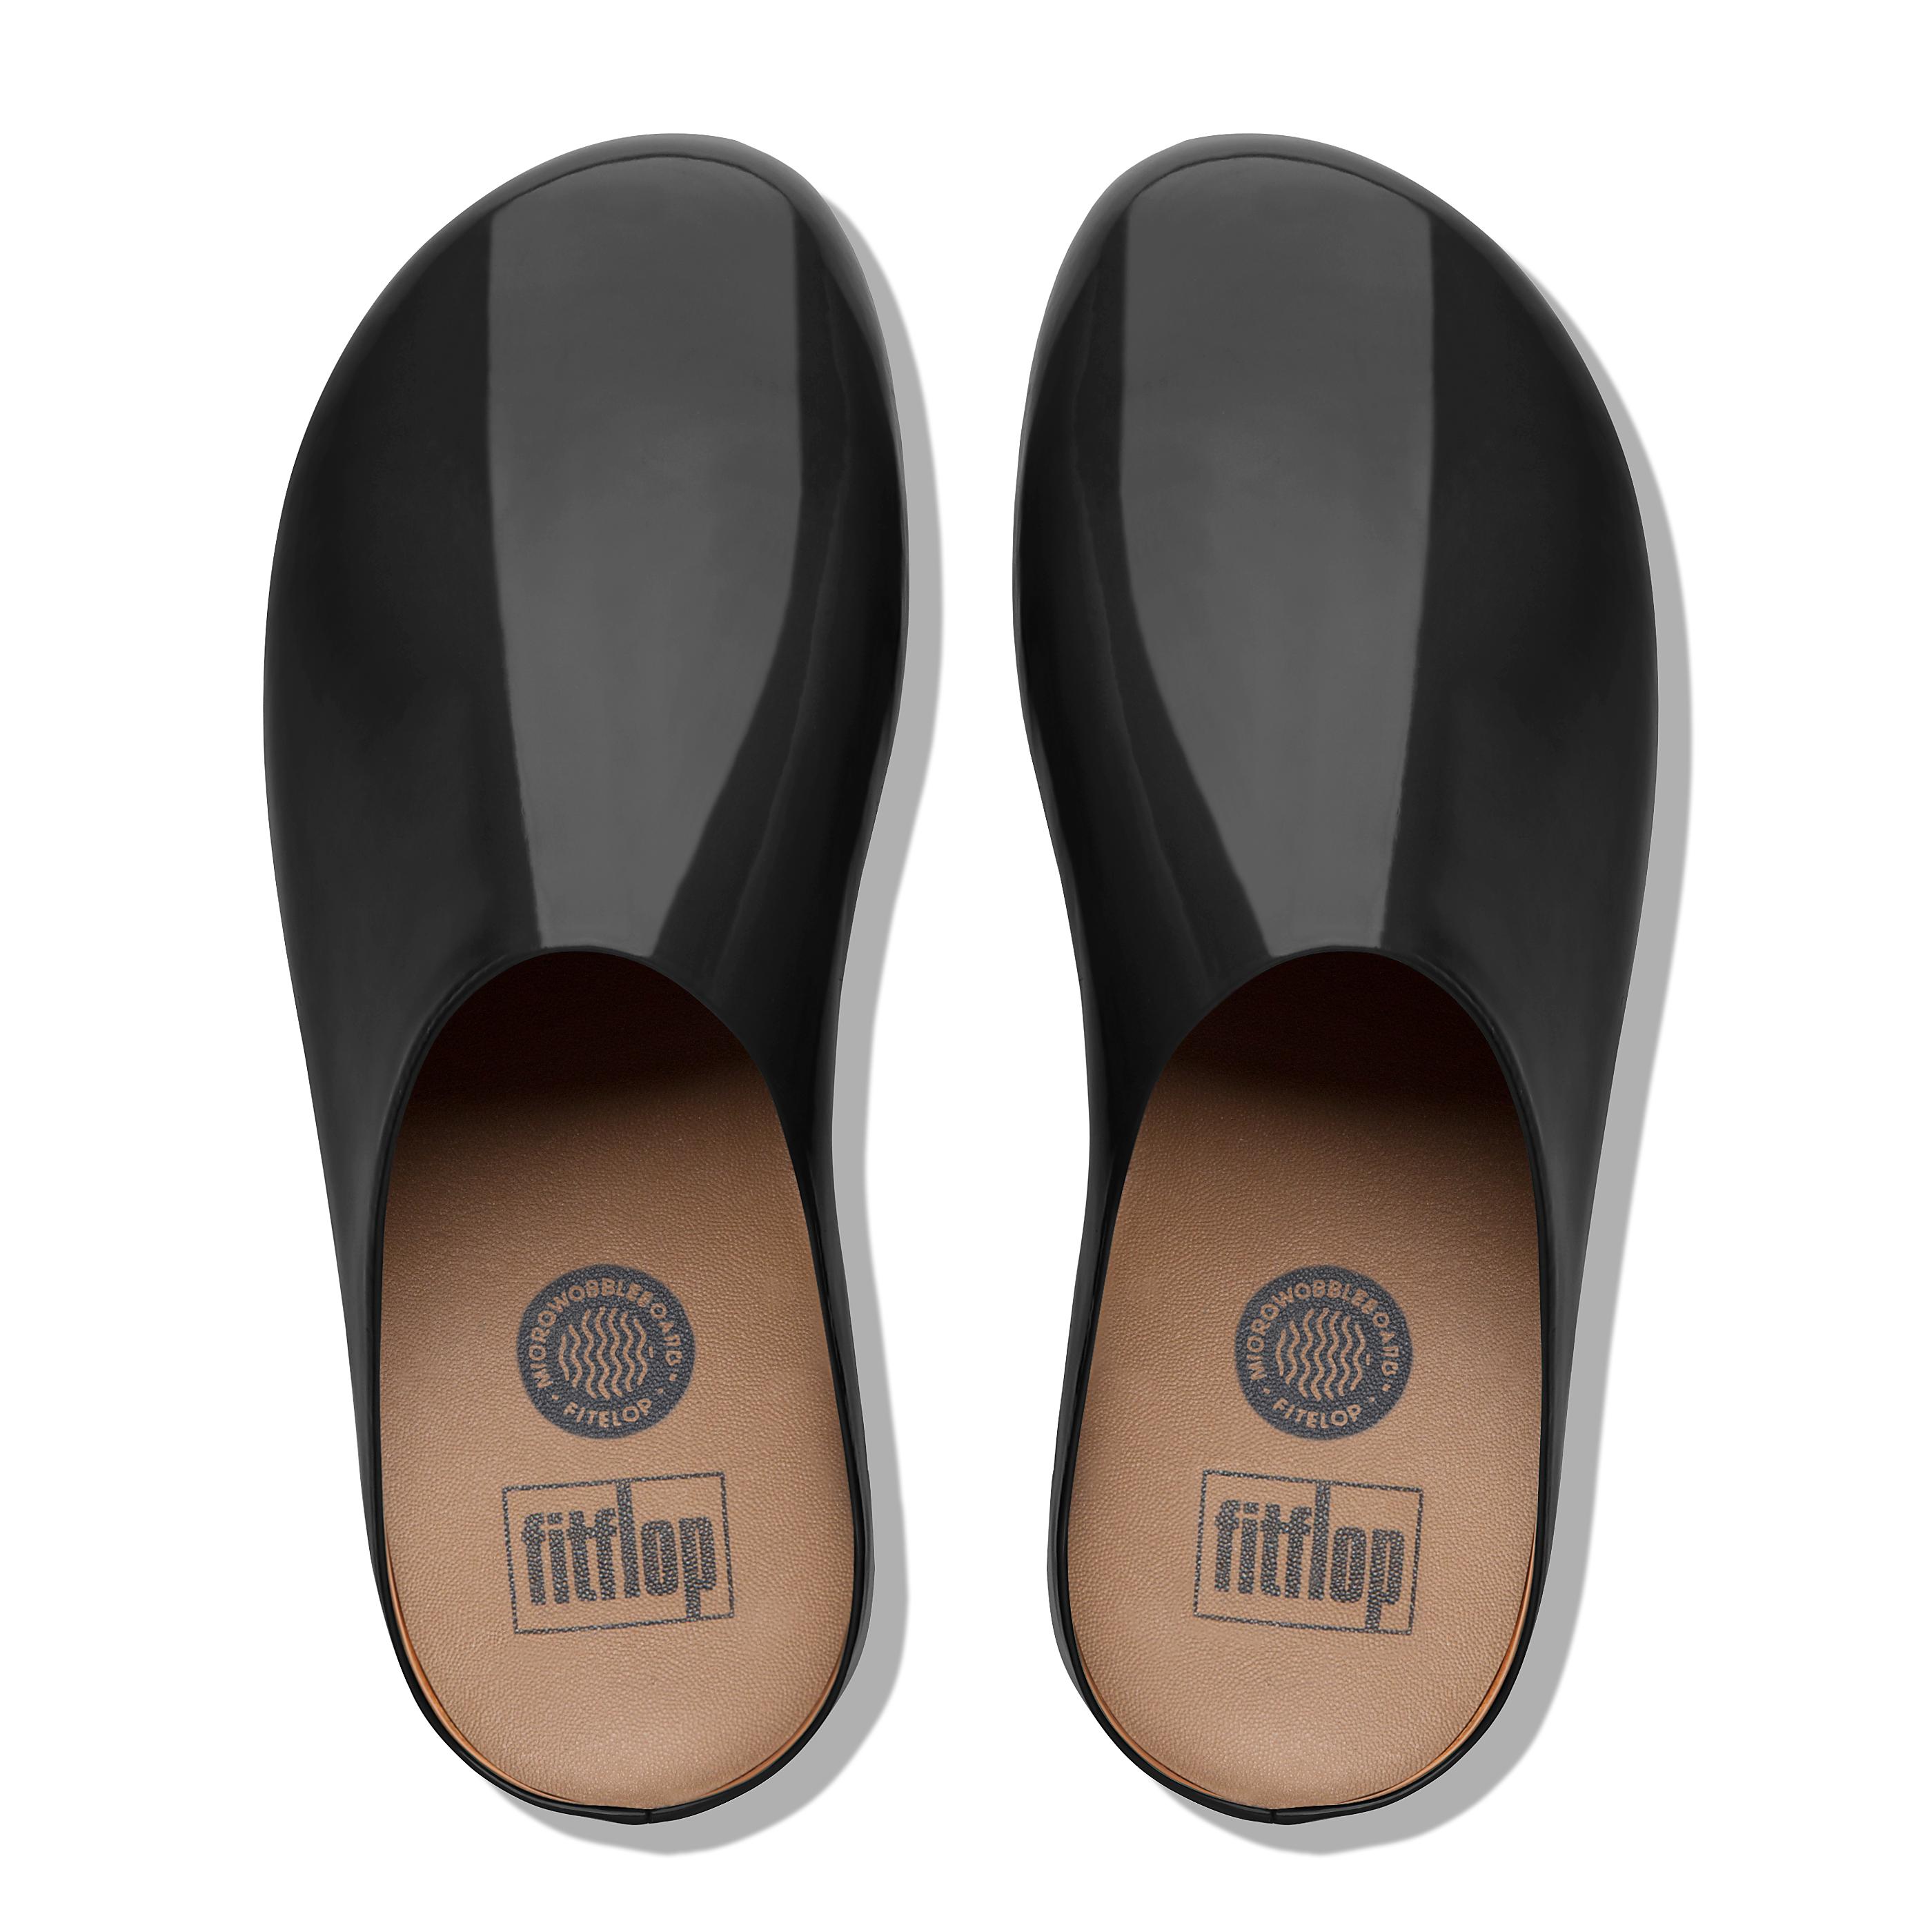 fitflop shuv patent